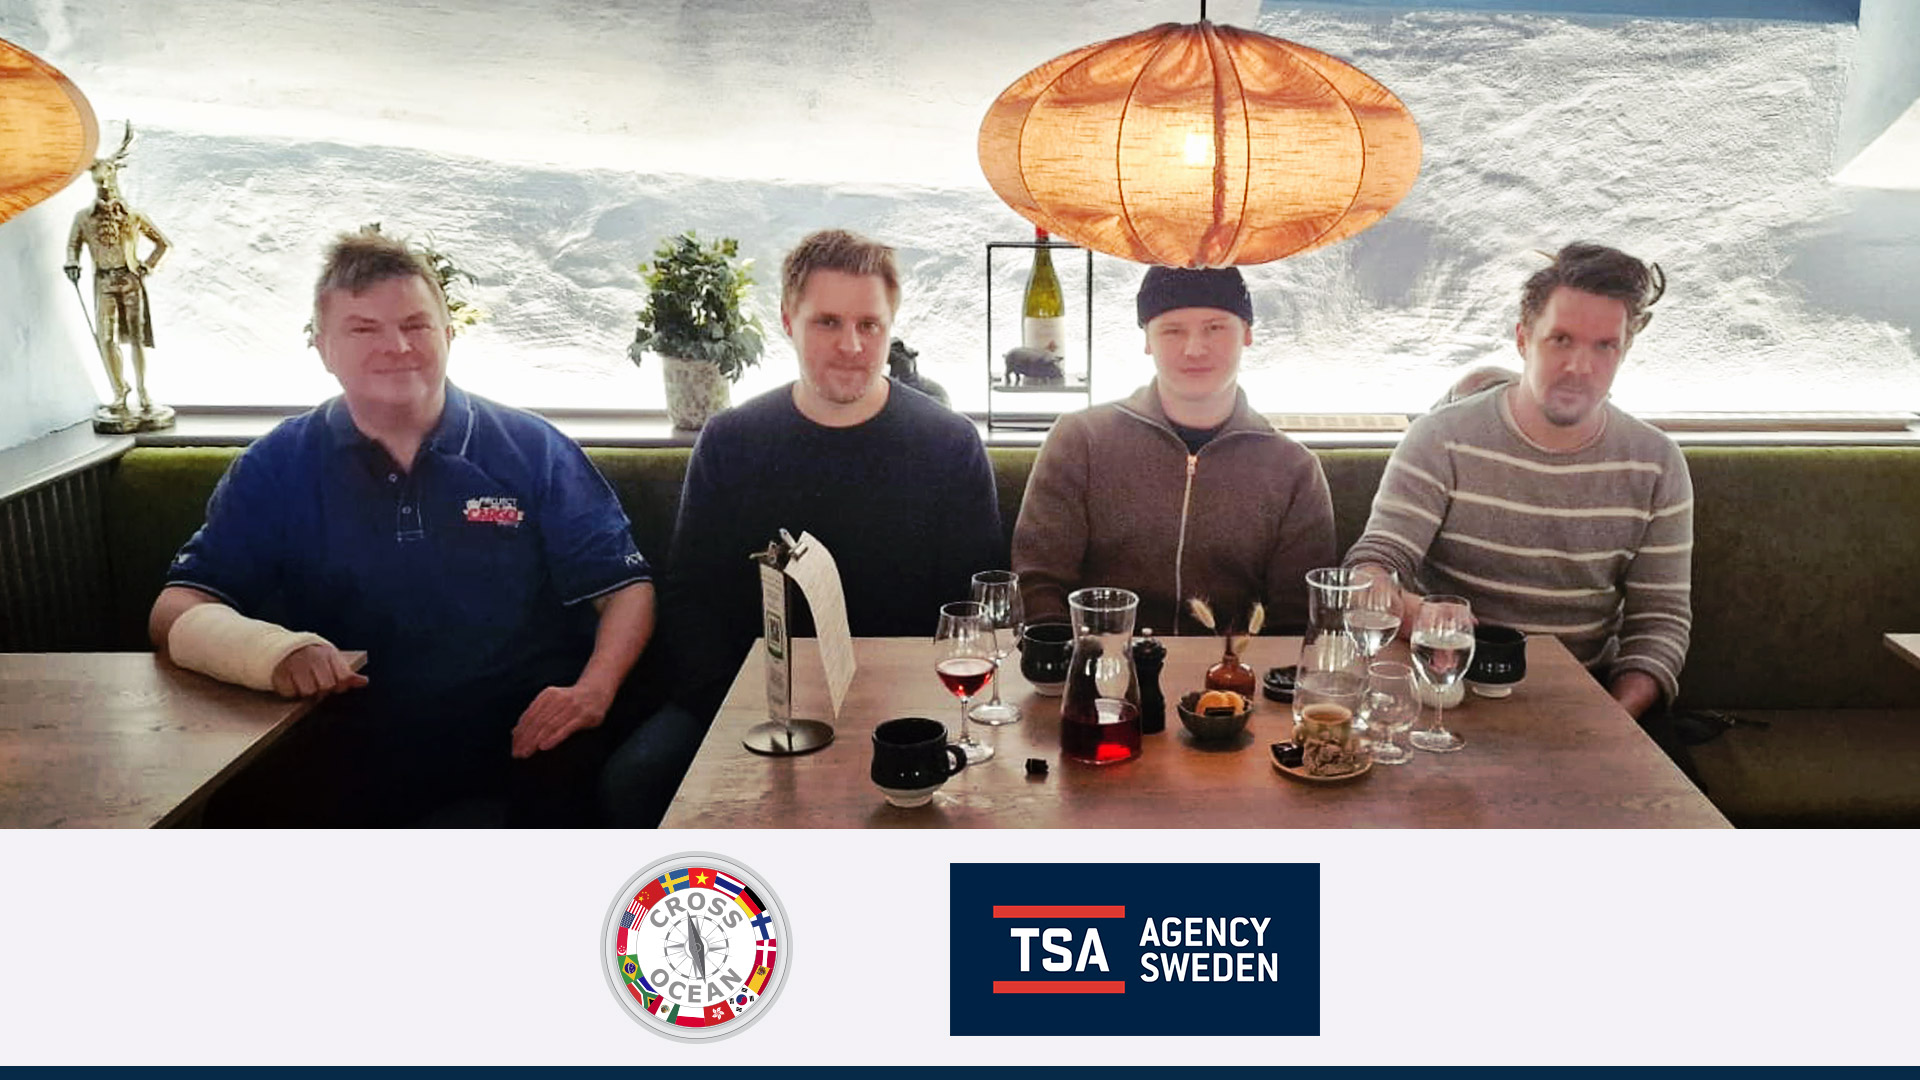 Cross Ocean's Chairman and service provider TSA Agency Sweden AB with the dream team consisting of Marcus, Joakim, and Isac handling some 450 ship calls a year